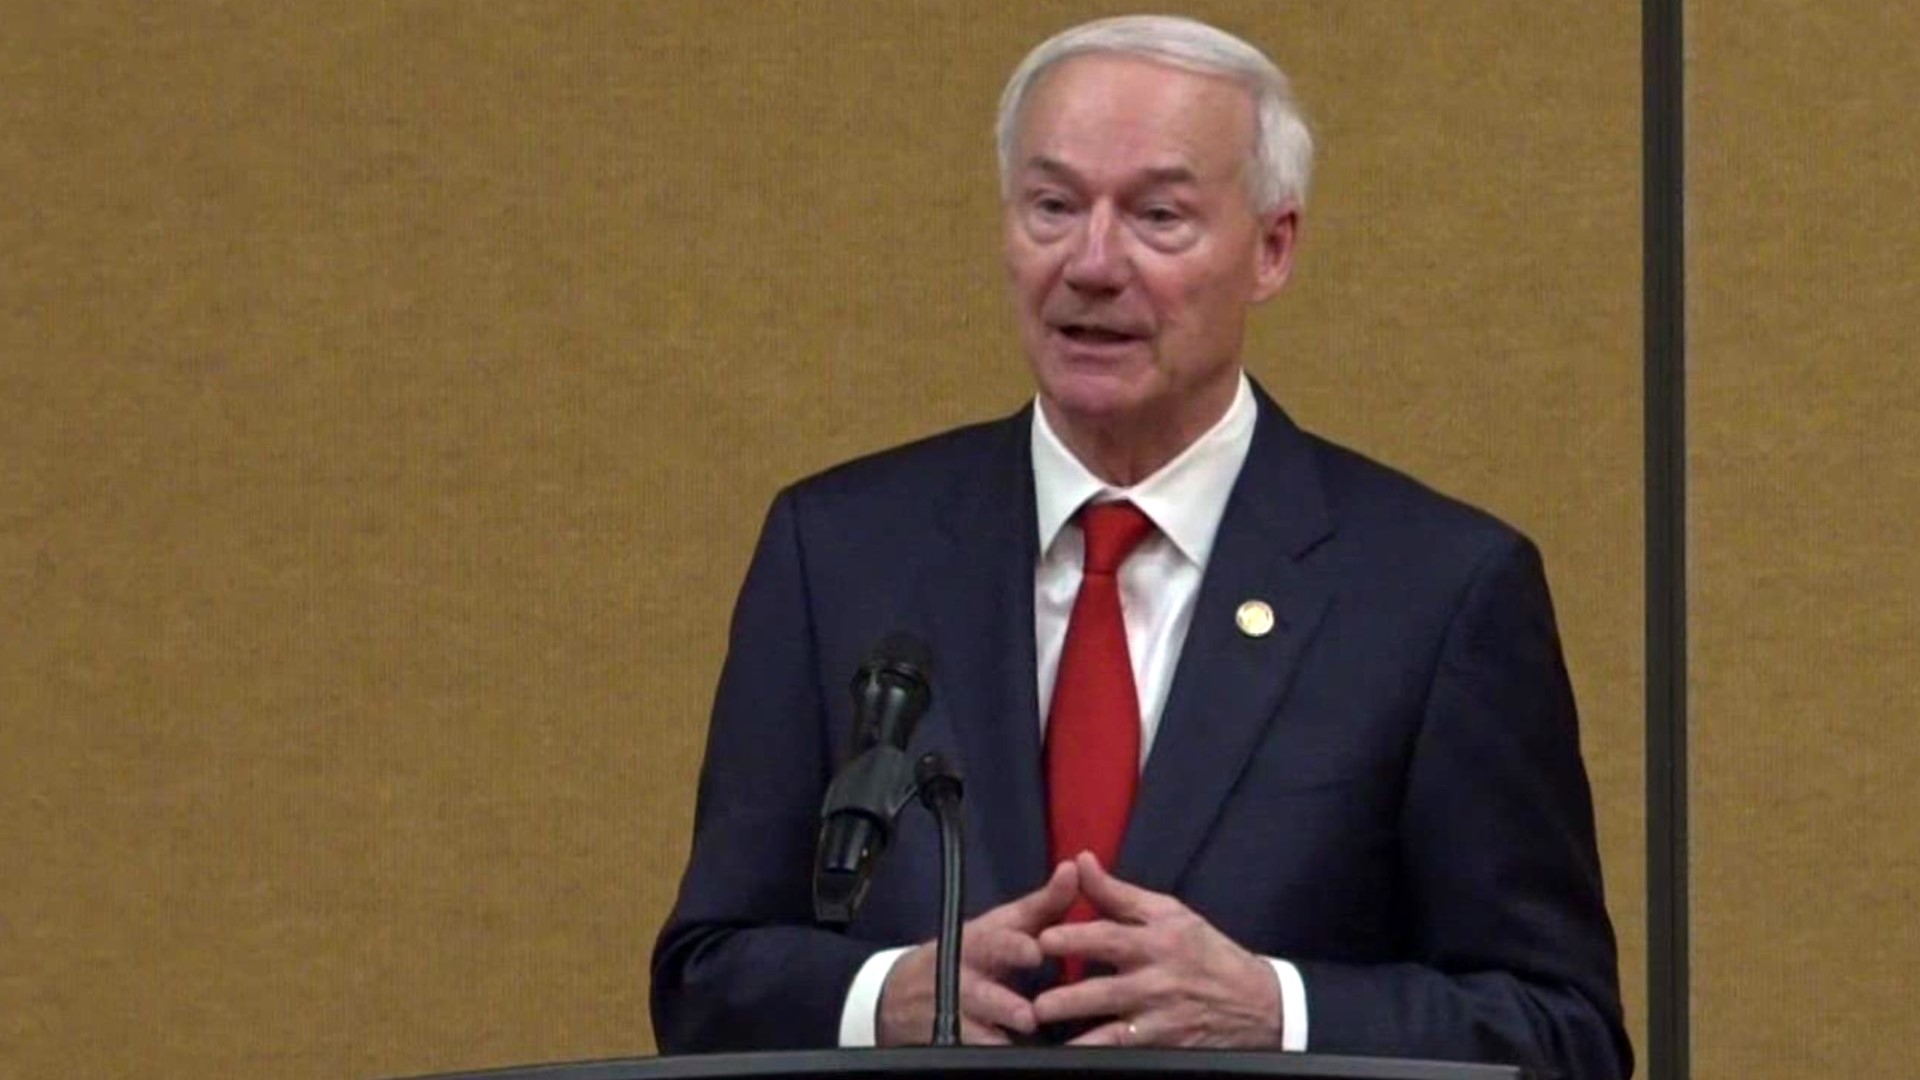 Gov. Hutchinson and Attorney General Rutledge voiced their opposition to the federal guidelines protecting sexual orientation and gender identity under Title IX.